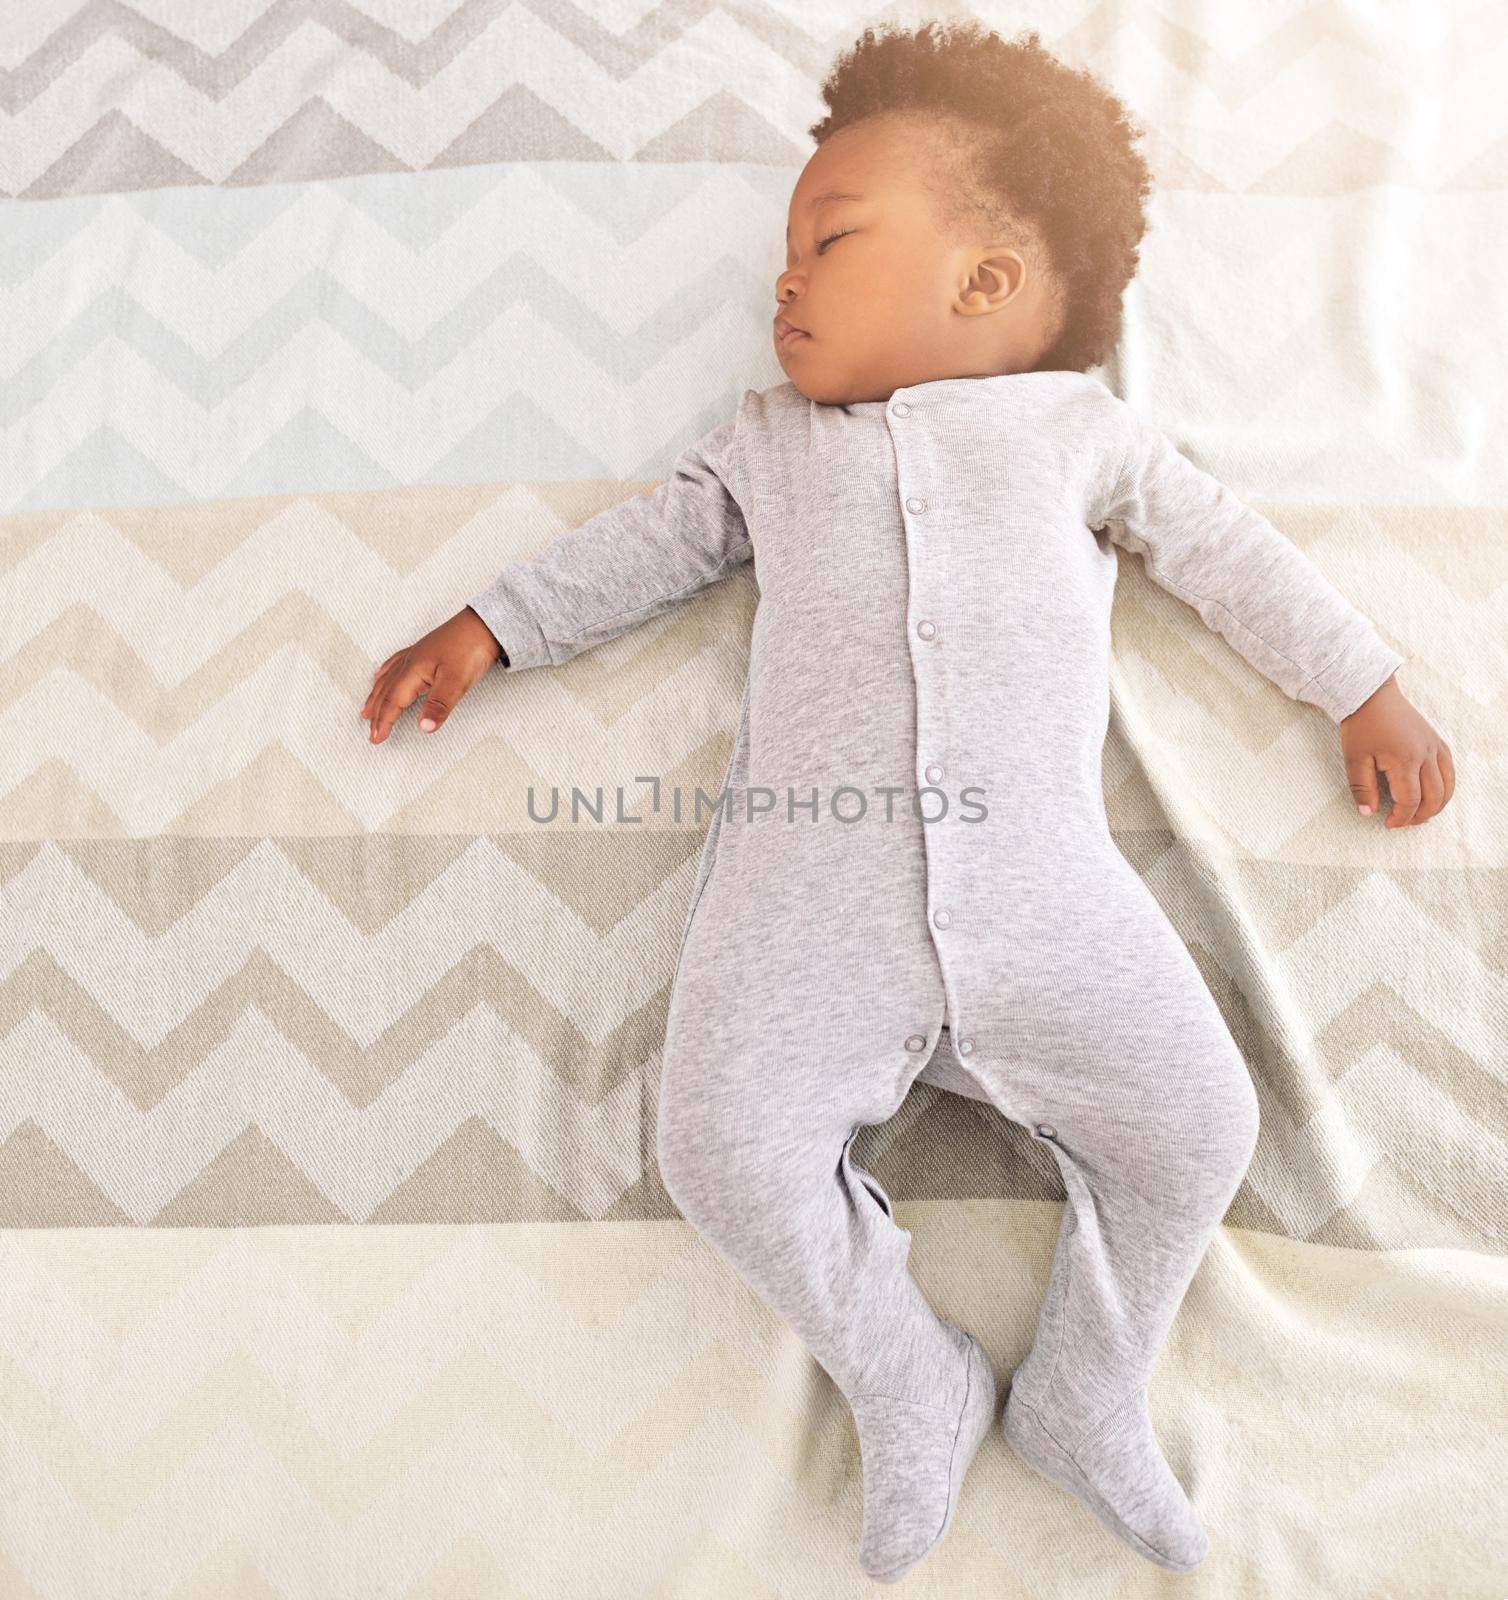 High angle shot of a little baby boy sleeping on a bed.